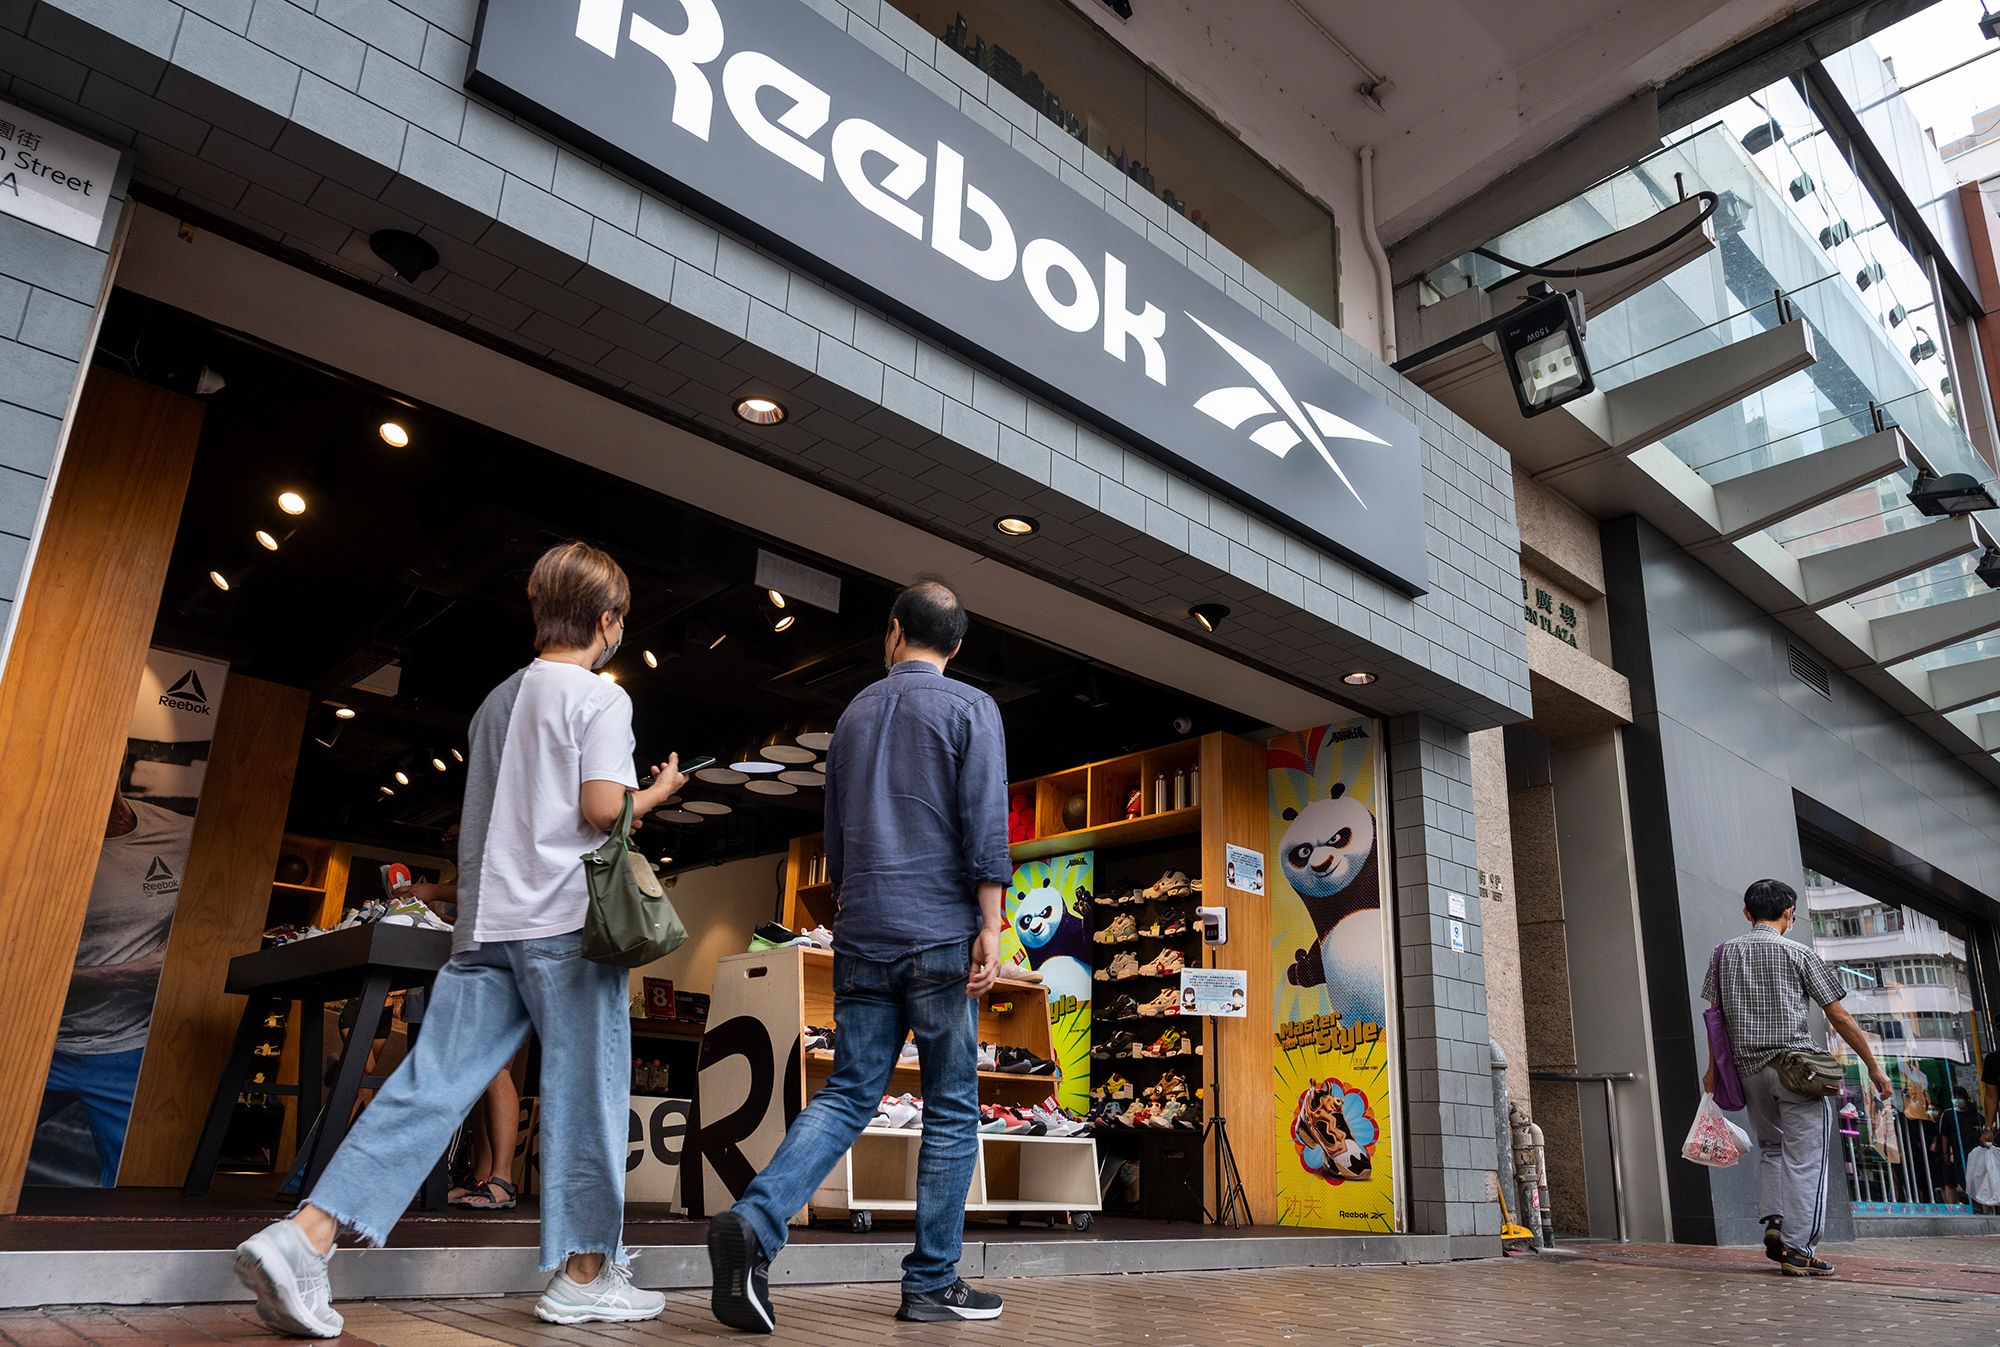 Adidas is selling Reebok for less than it originally paid | CNN Business